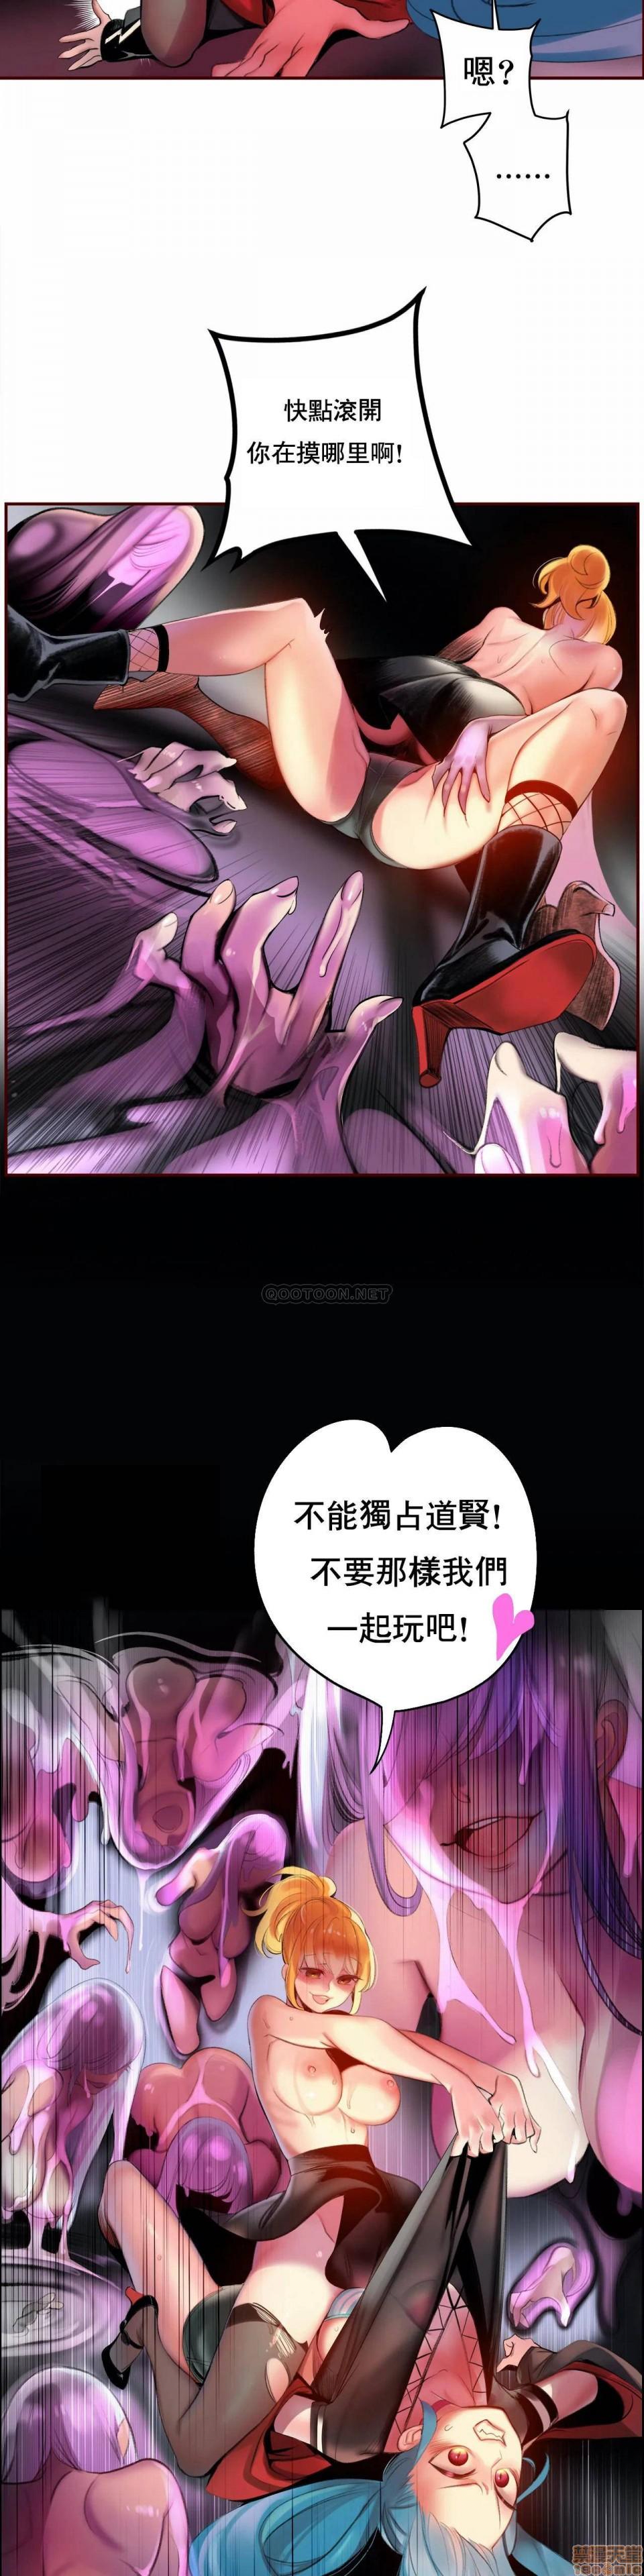 [Juder] Lilith`s Cord (第二季) Ch.77-93 end [Chinese] 179